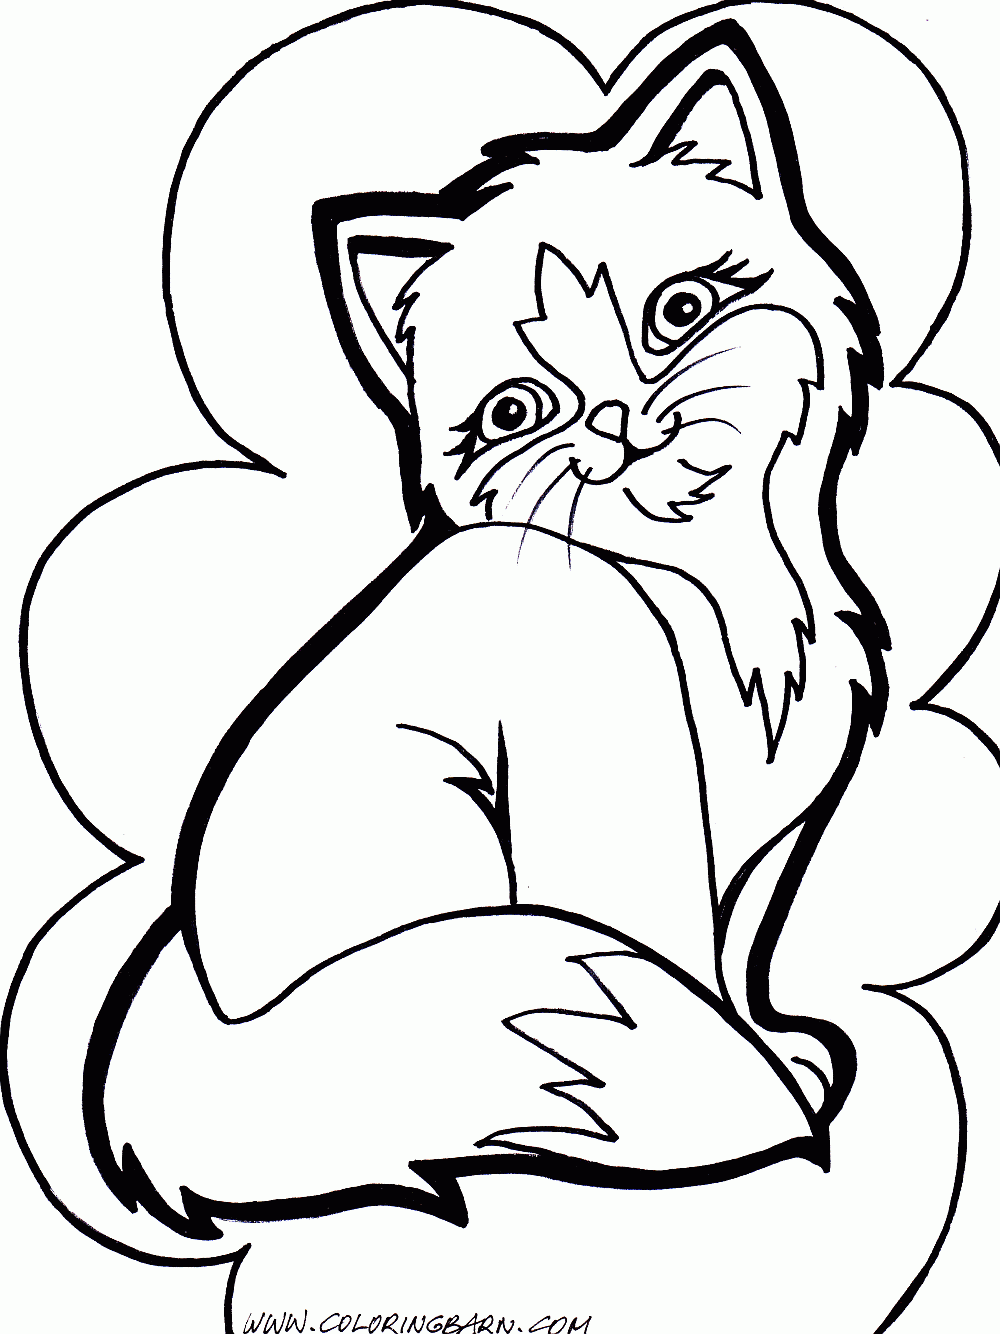 Three Little Kittens Coloring Sheet Kittens Coloring Siamese